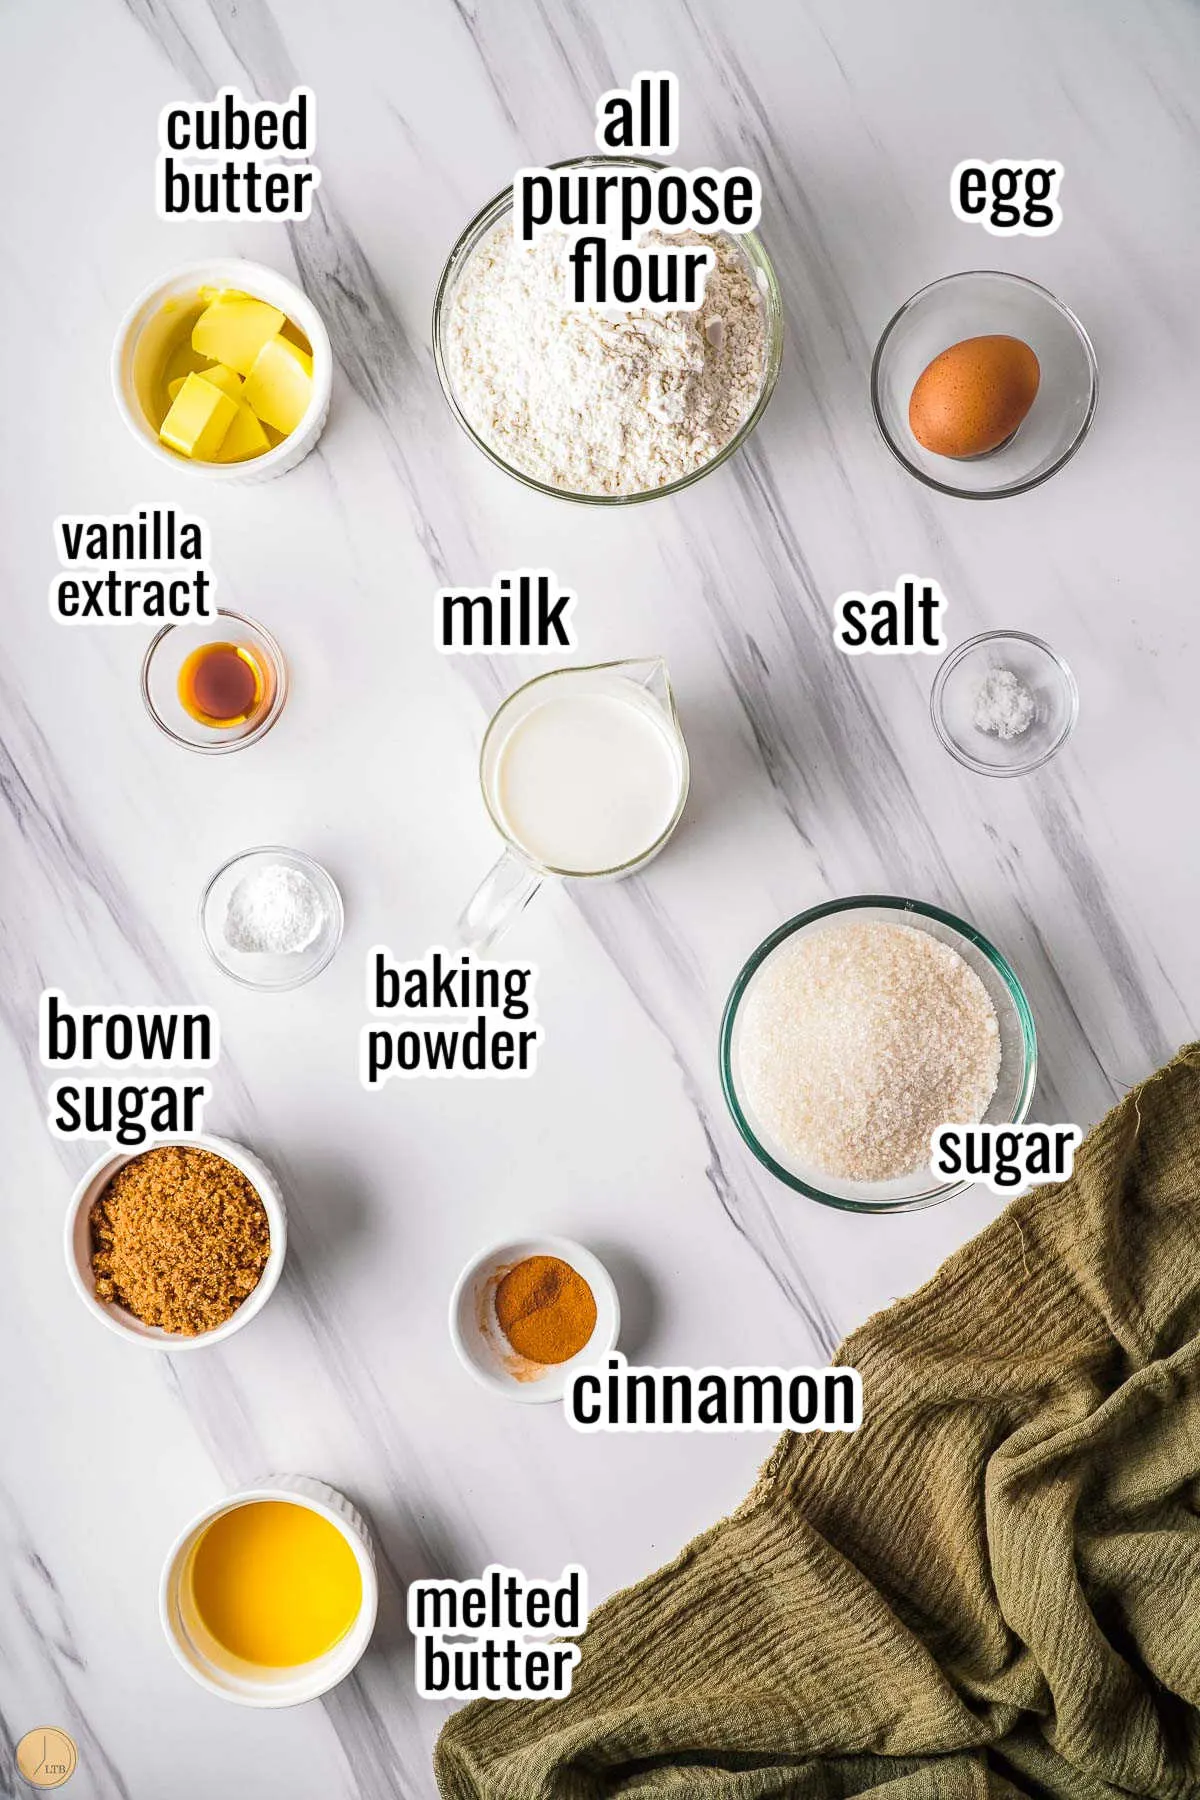 main ingredients for cake like cups flour, pinch salt, cups sugar, tablespoons of butter